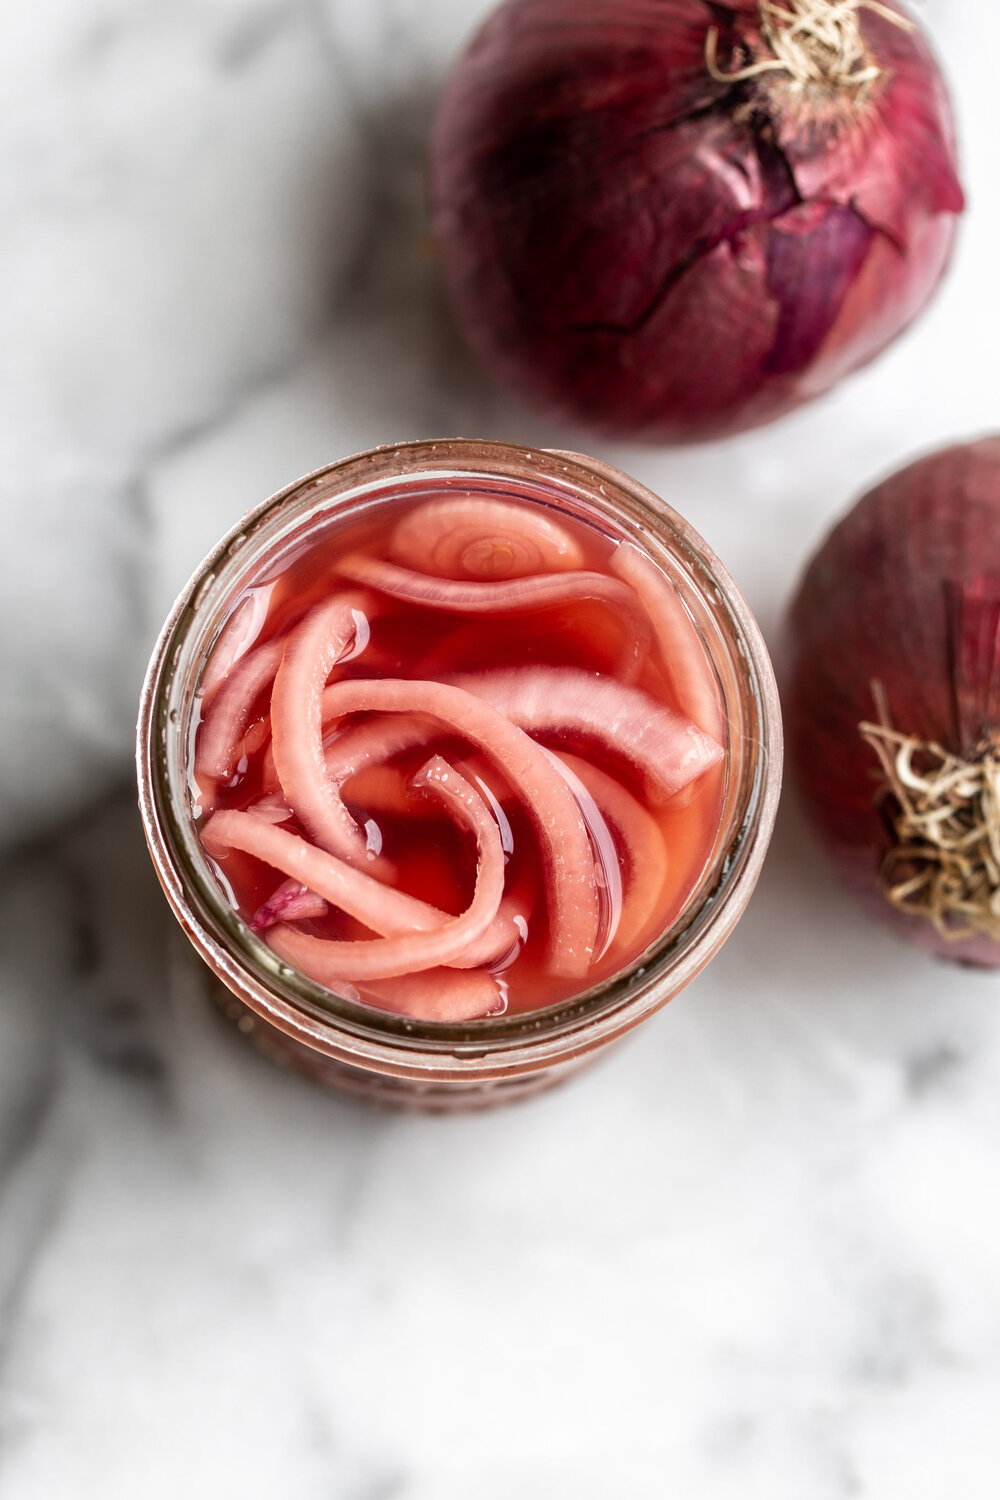 This quick pickled red onion recipe comes together with just a few simple ingredients. Make in advance and use for a tangy condiment. 